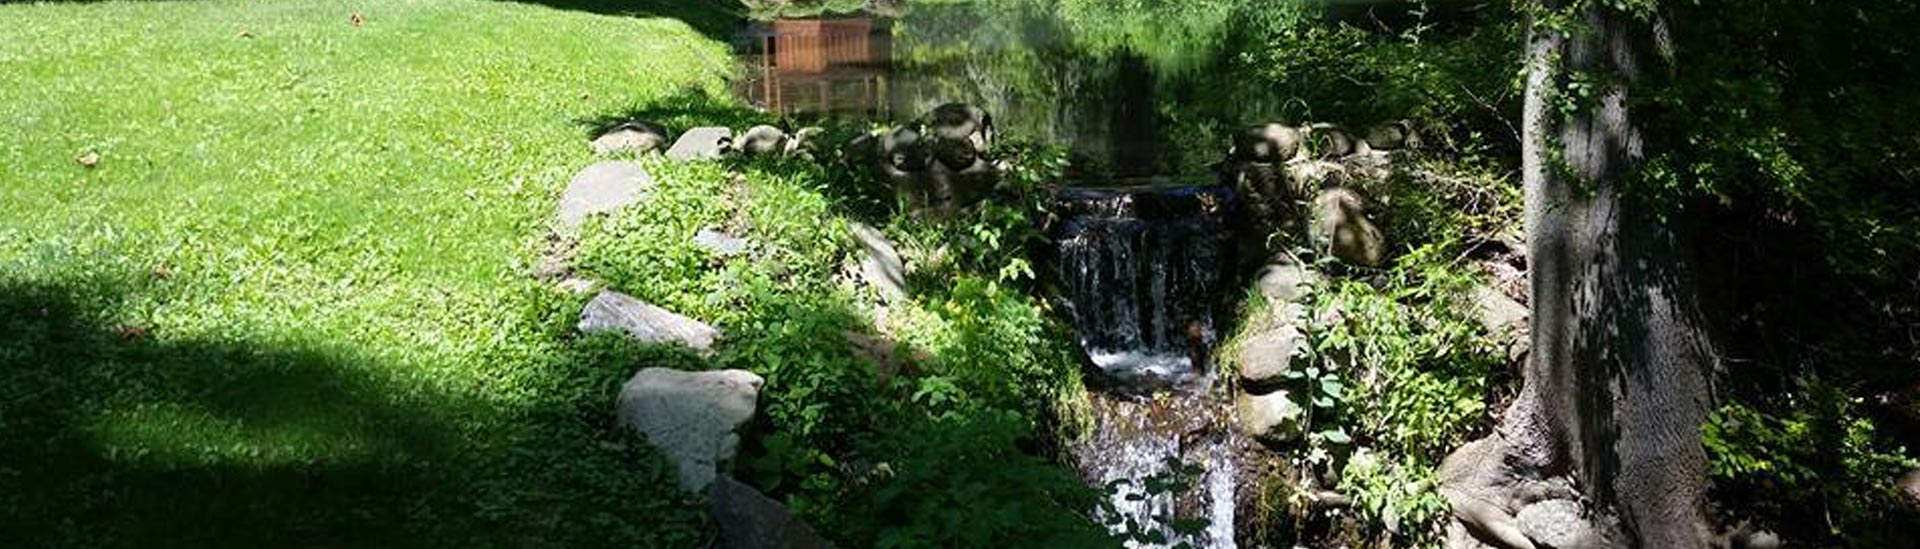 Pond Maintenance & Pond Cleaning Services